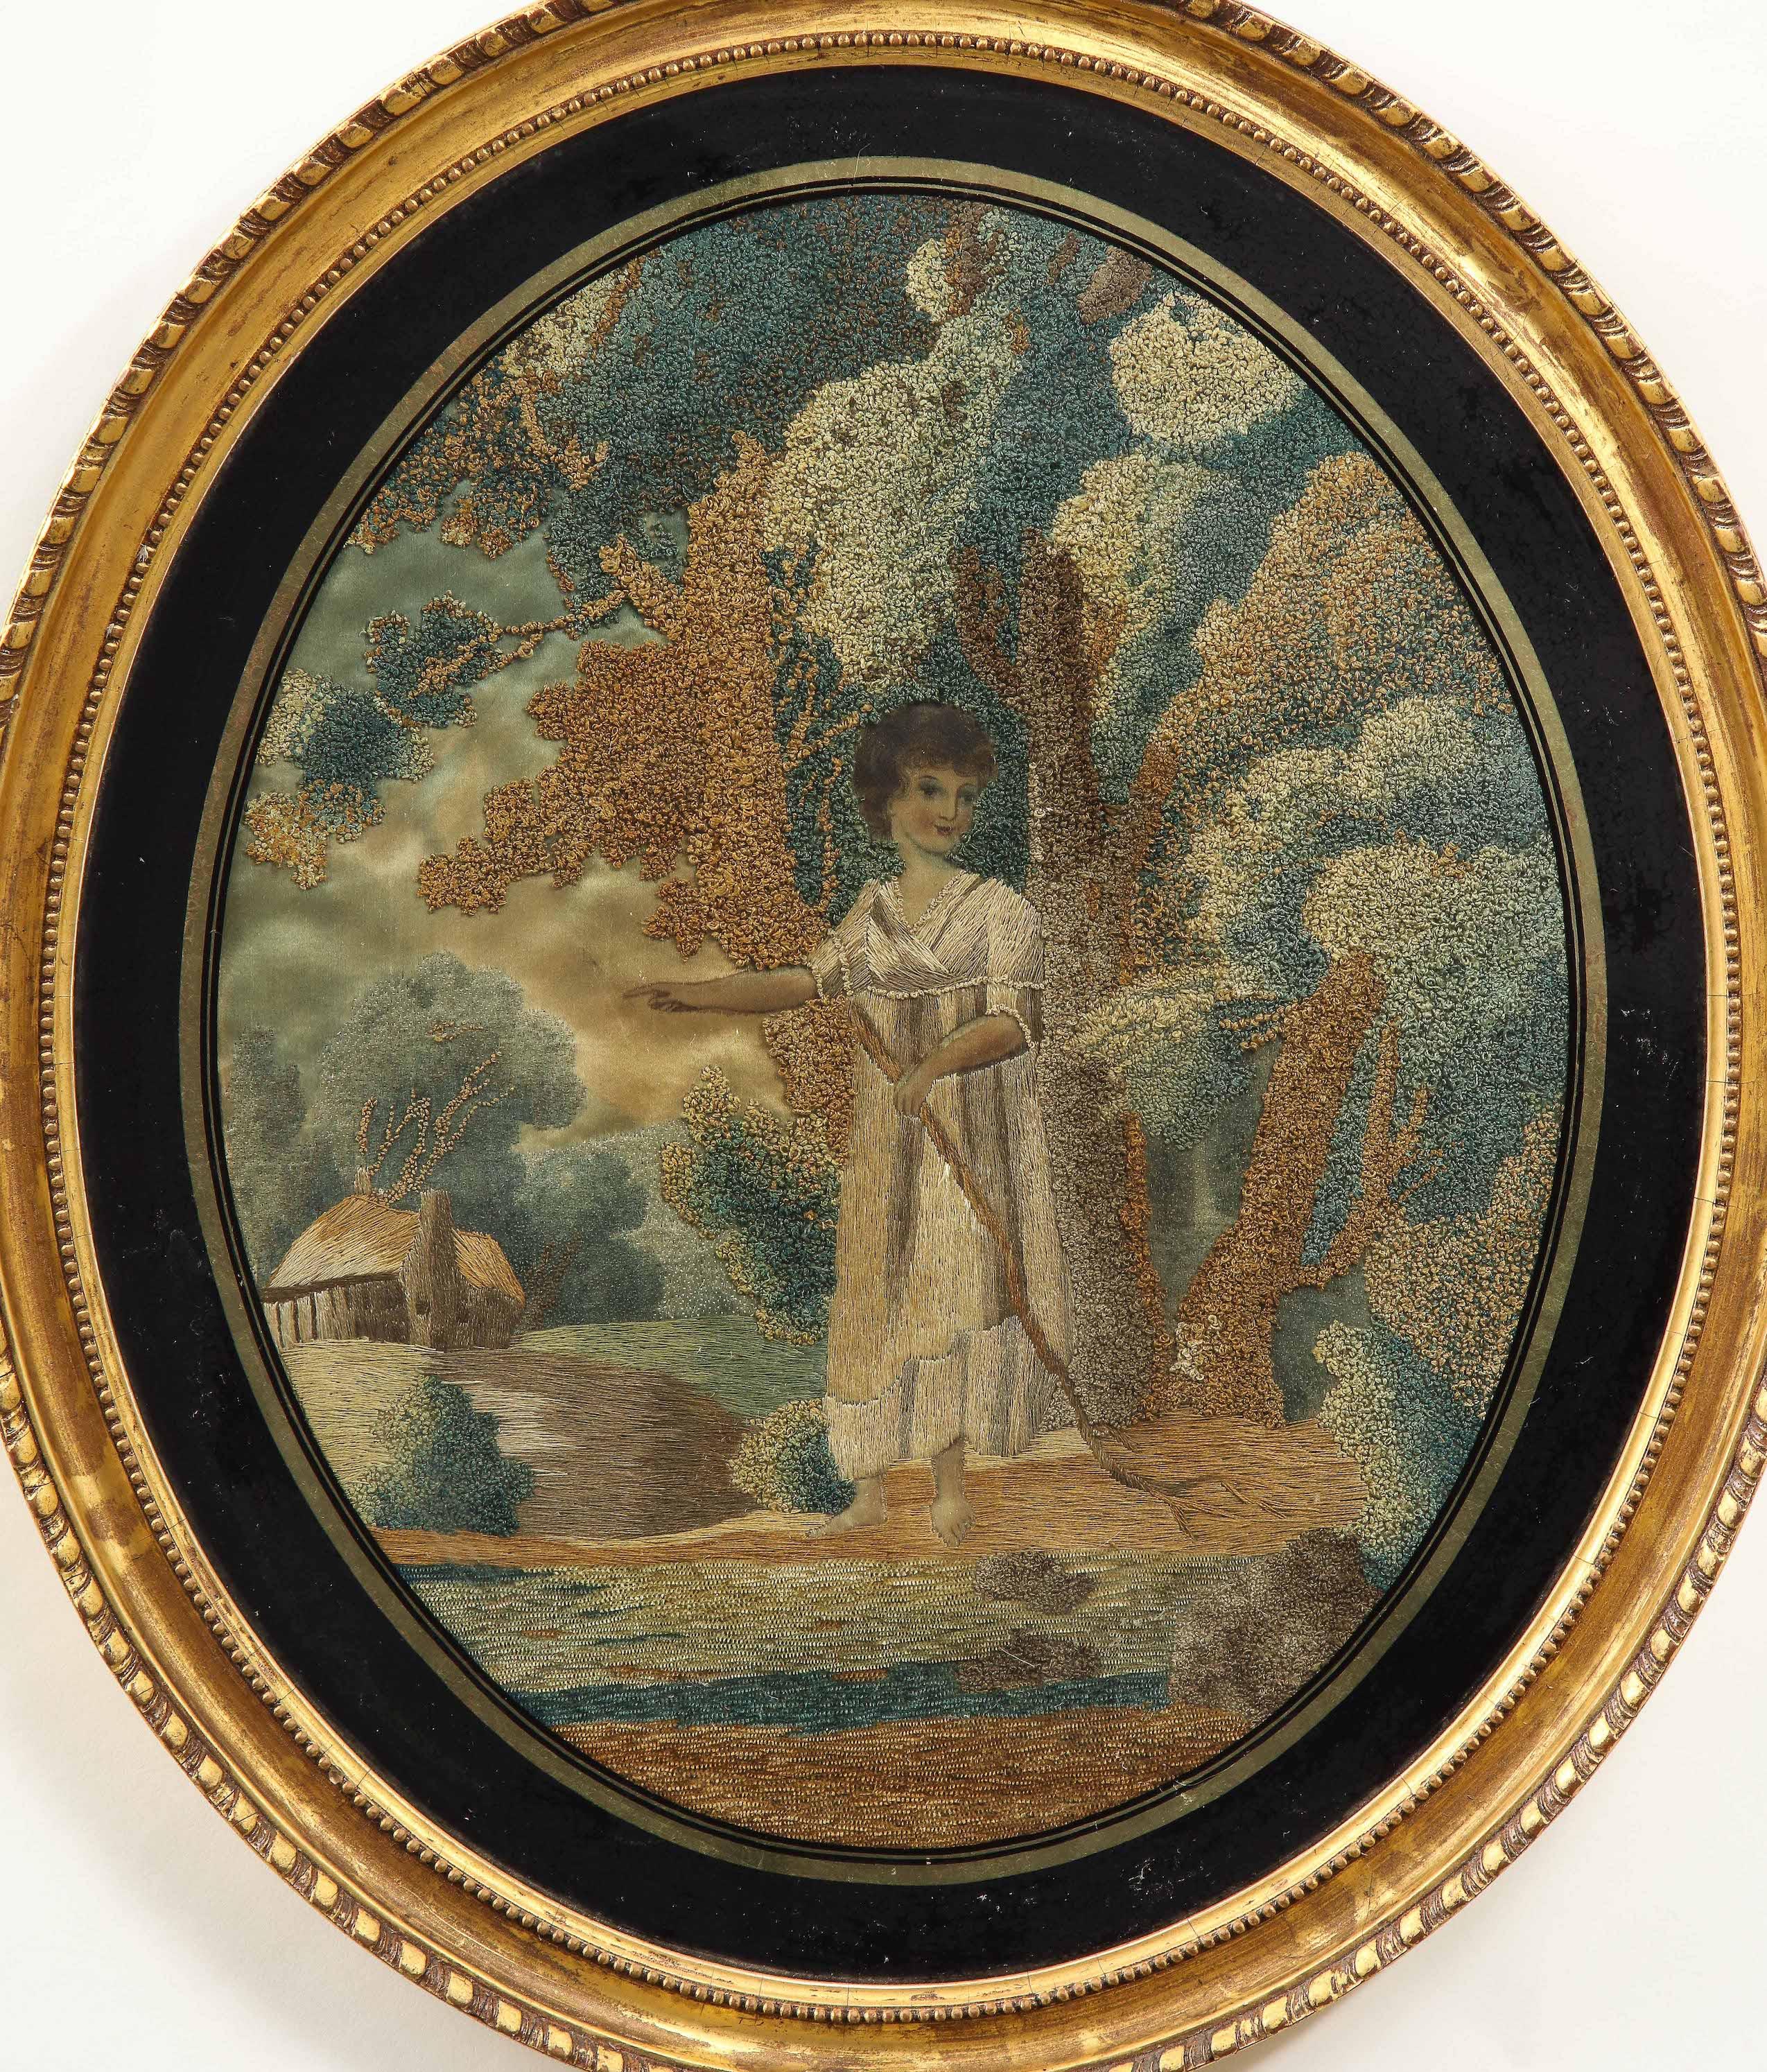 Extremely fine embroidery of a neoclassical maiden dressed as a shepherdess in a forest with a rustic thatched cottage in background. Wonderful use of short and long stitches and shading on the foliage. The figure's face and feet painted. Set within